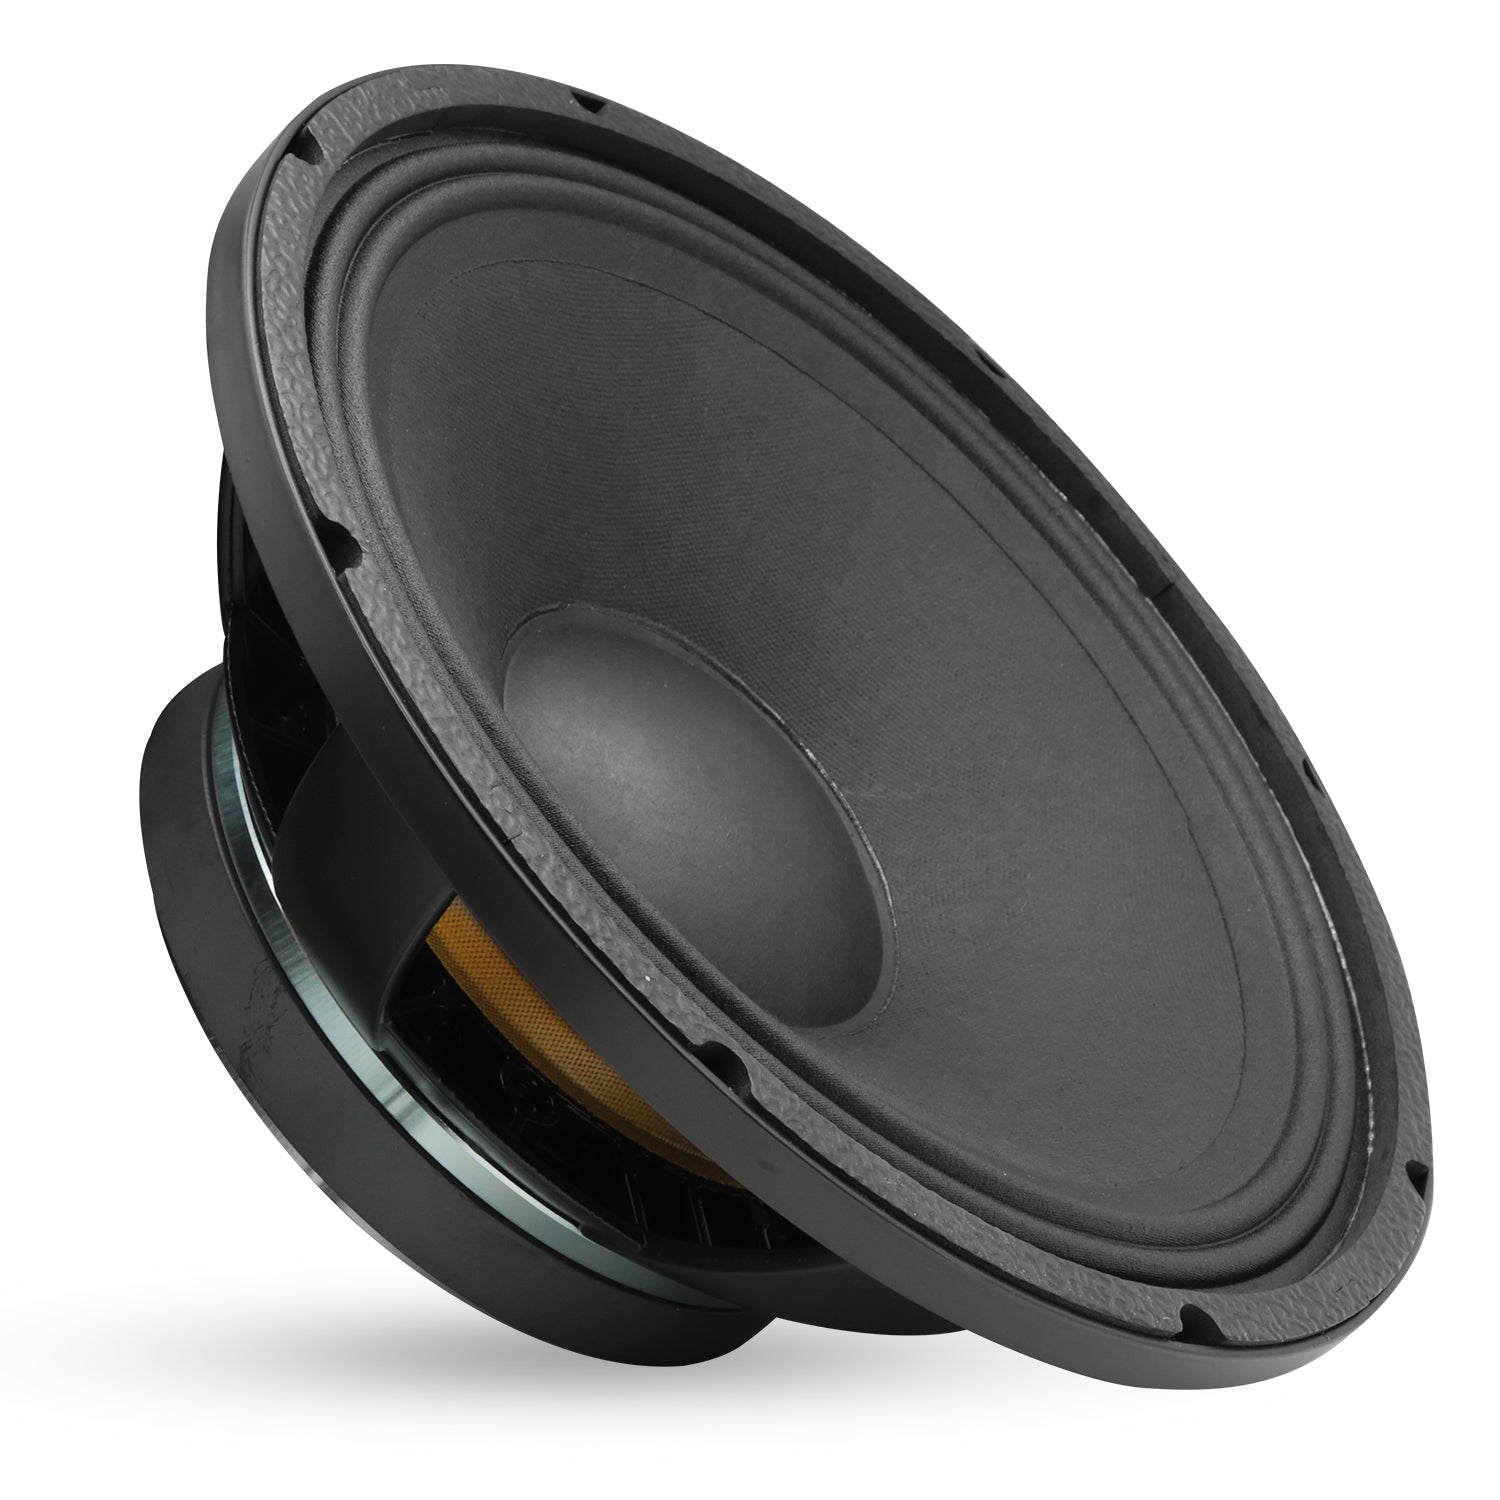 5 Core 12 Inch Subwoofer Speaker 600W Max 8 Ohm Full Range Replacement DJ Bass Sub Woofer